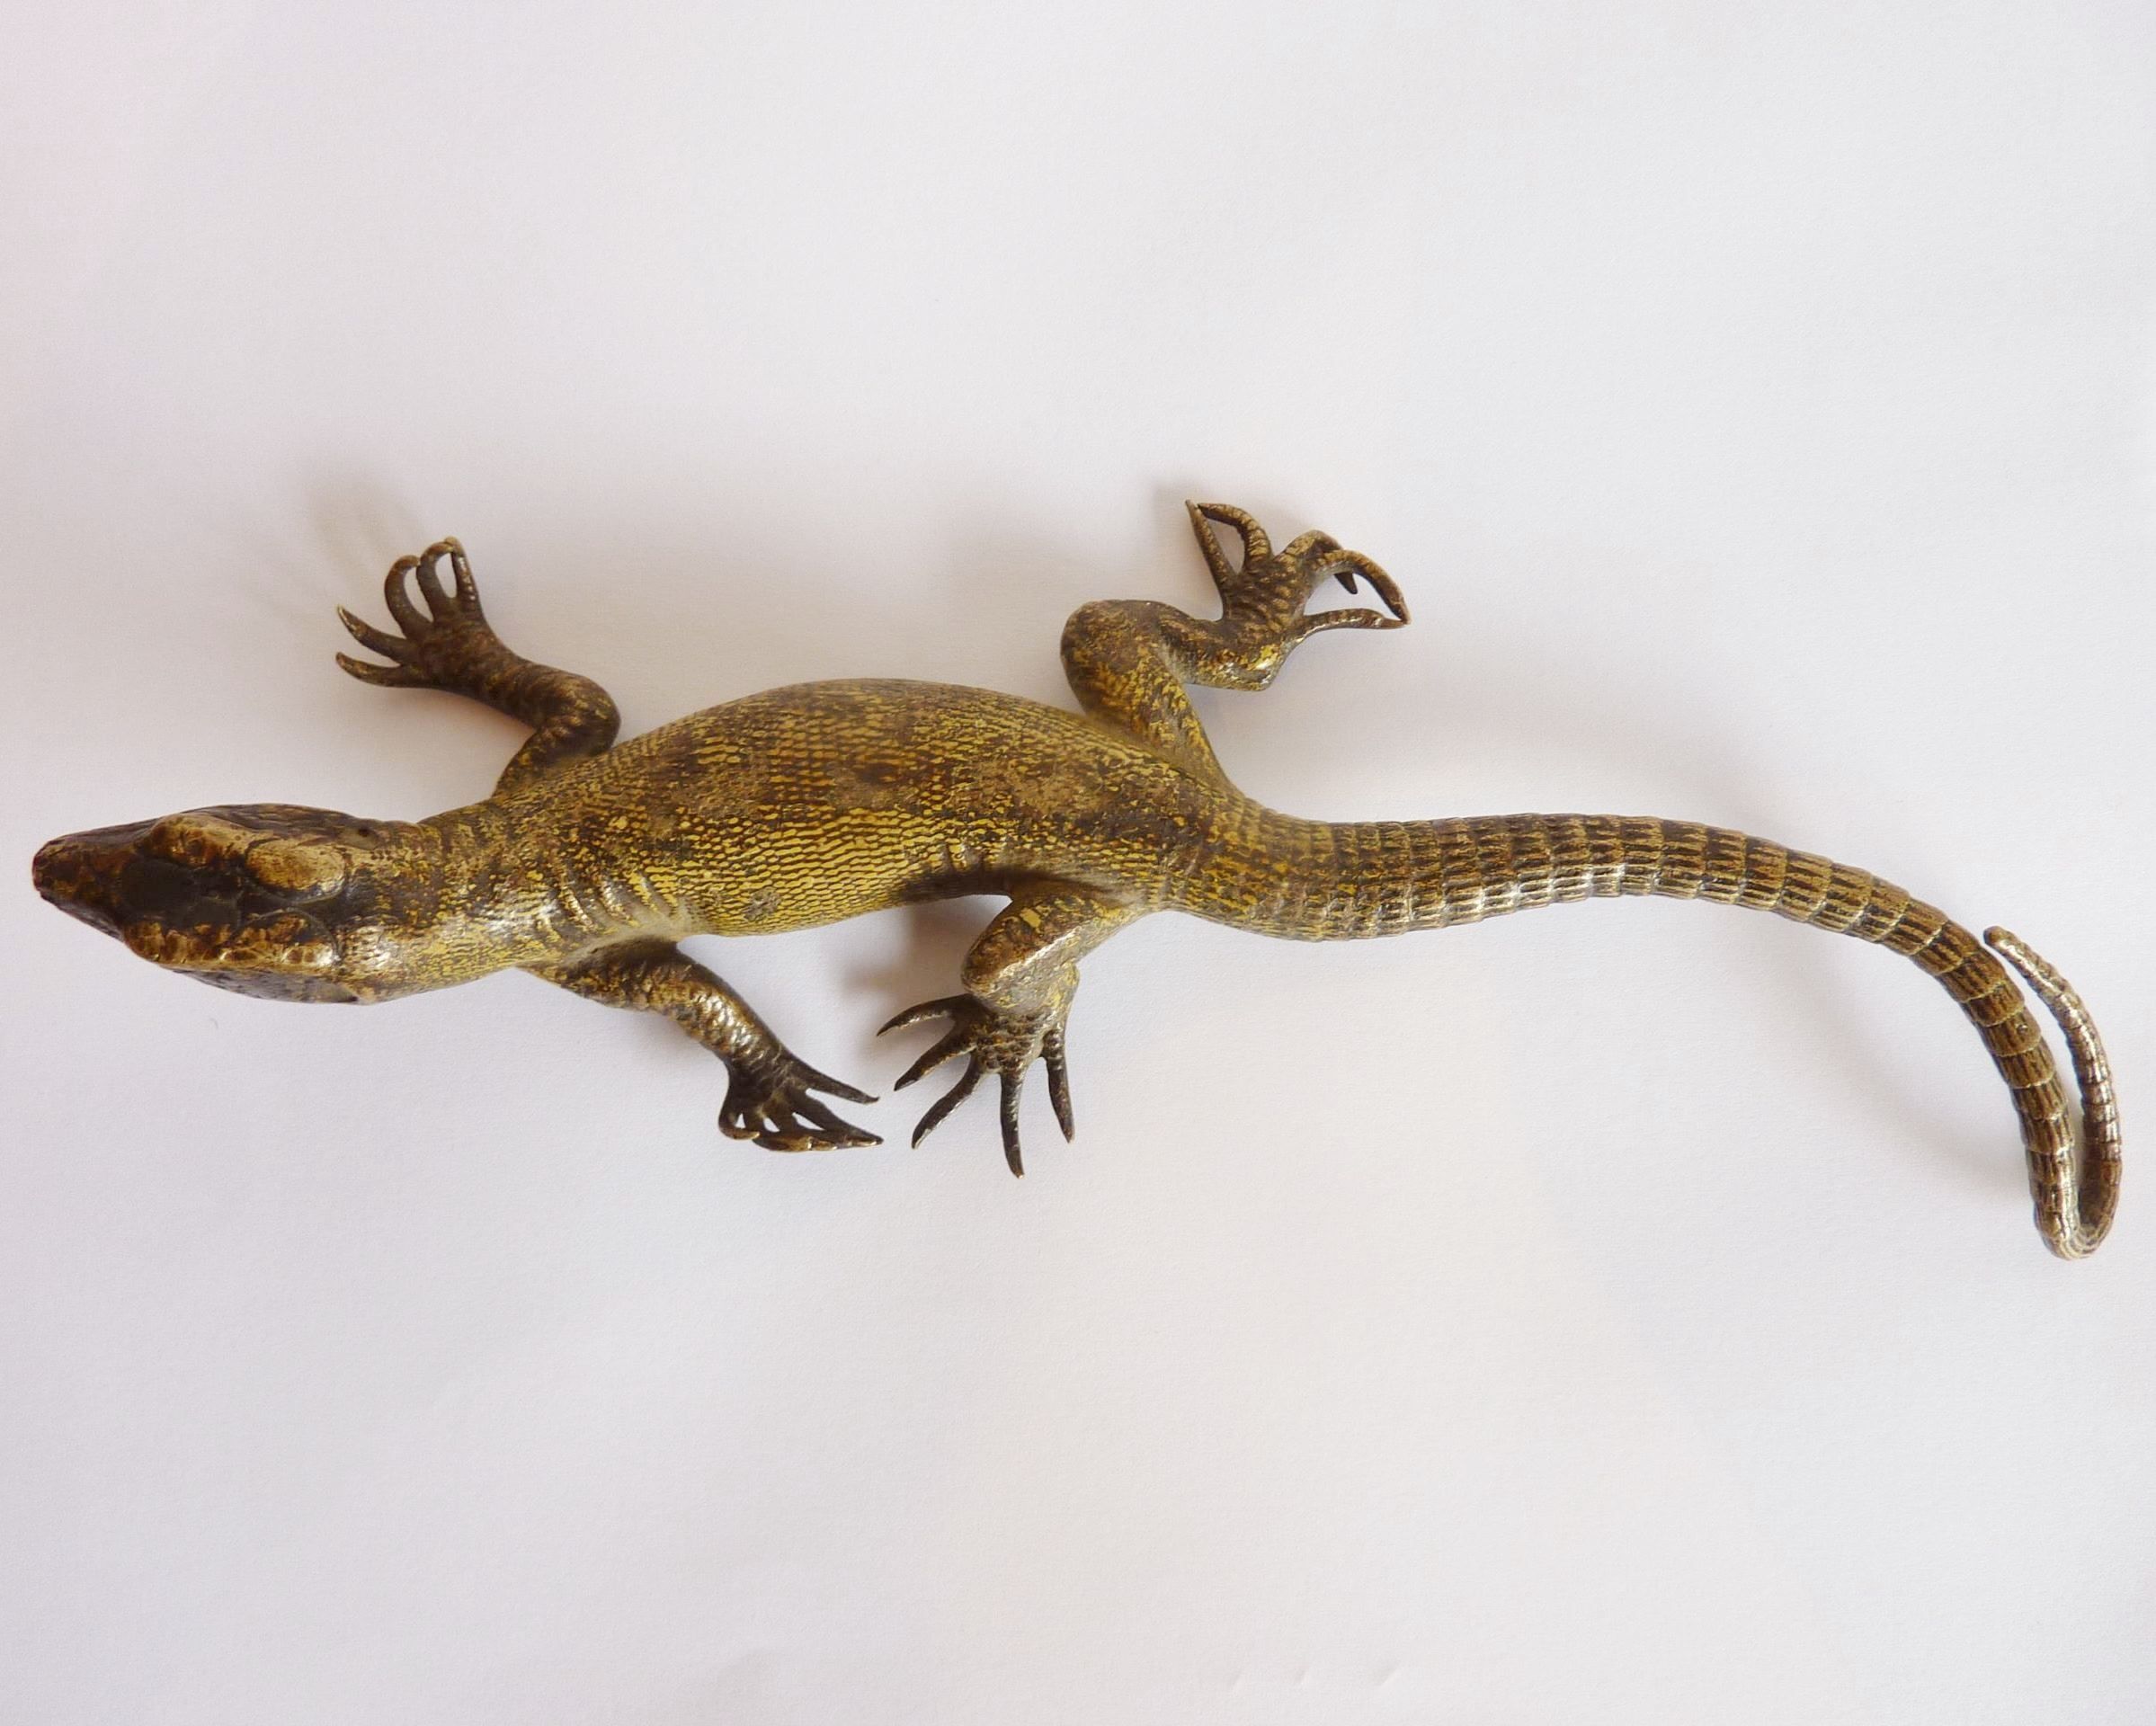 An early 20th century cold-painted bronze model of a lizard with yellow scaly skin; - Image 4 of 5